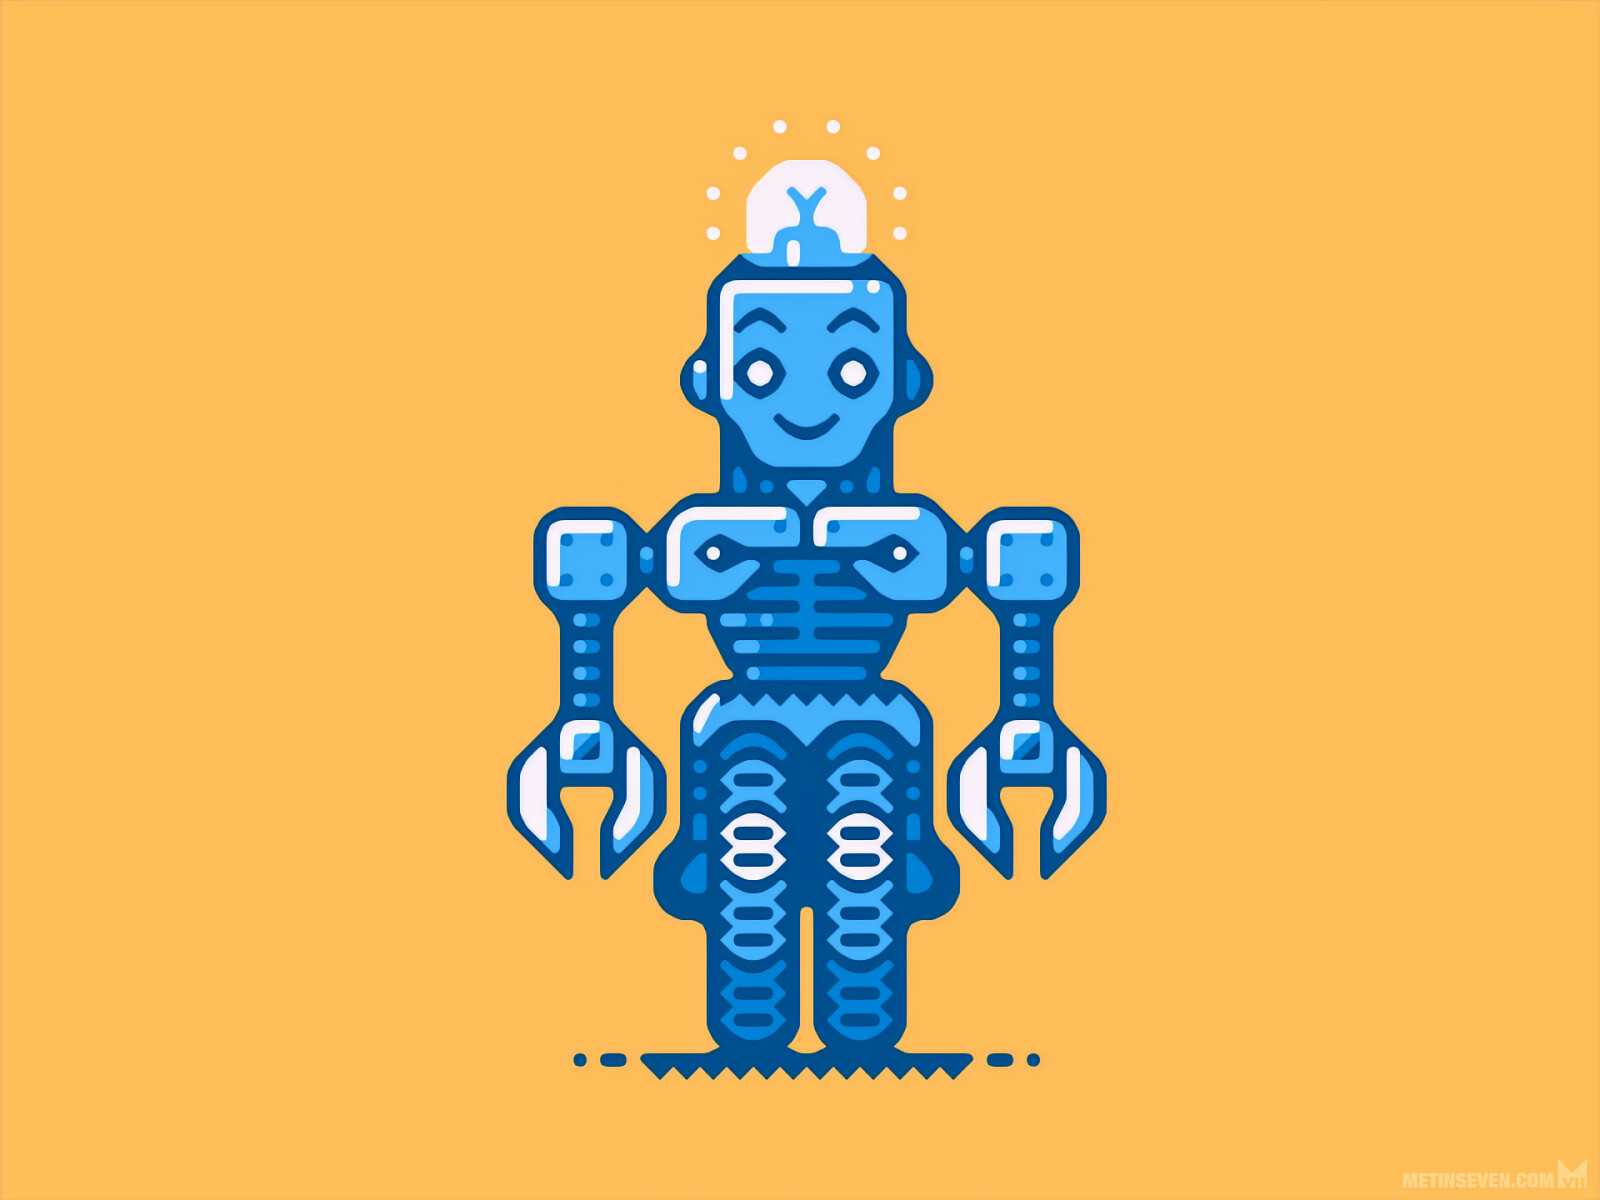 Icon-style vector illustration about robots and AI